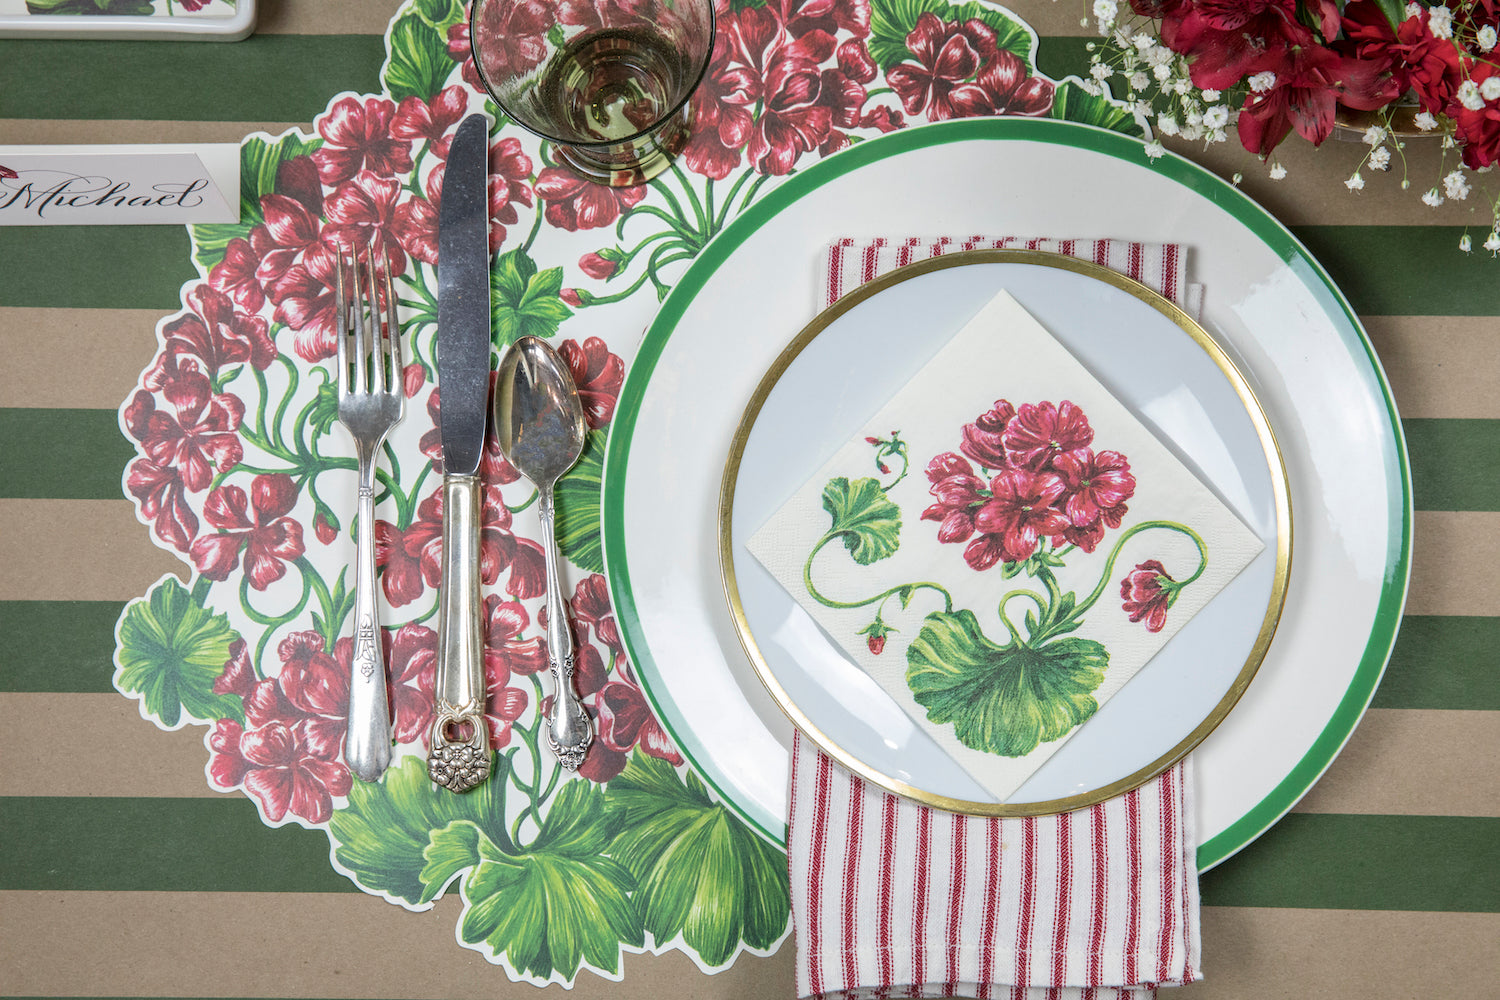 A red and green Die-cut Geranium Placemat by Hester &amp; Cook, perfect for adding a touch of summer florals to your table setting.